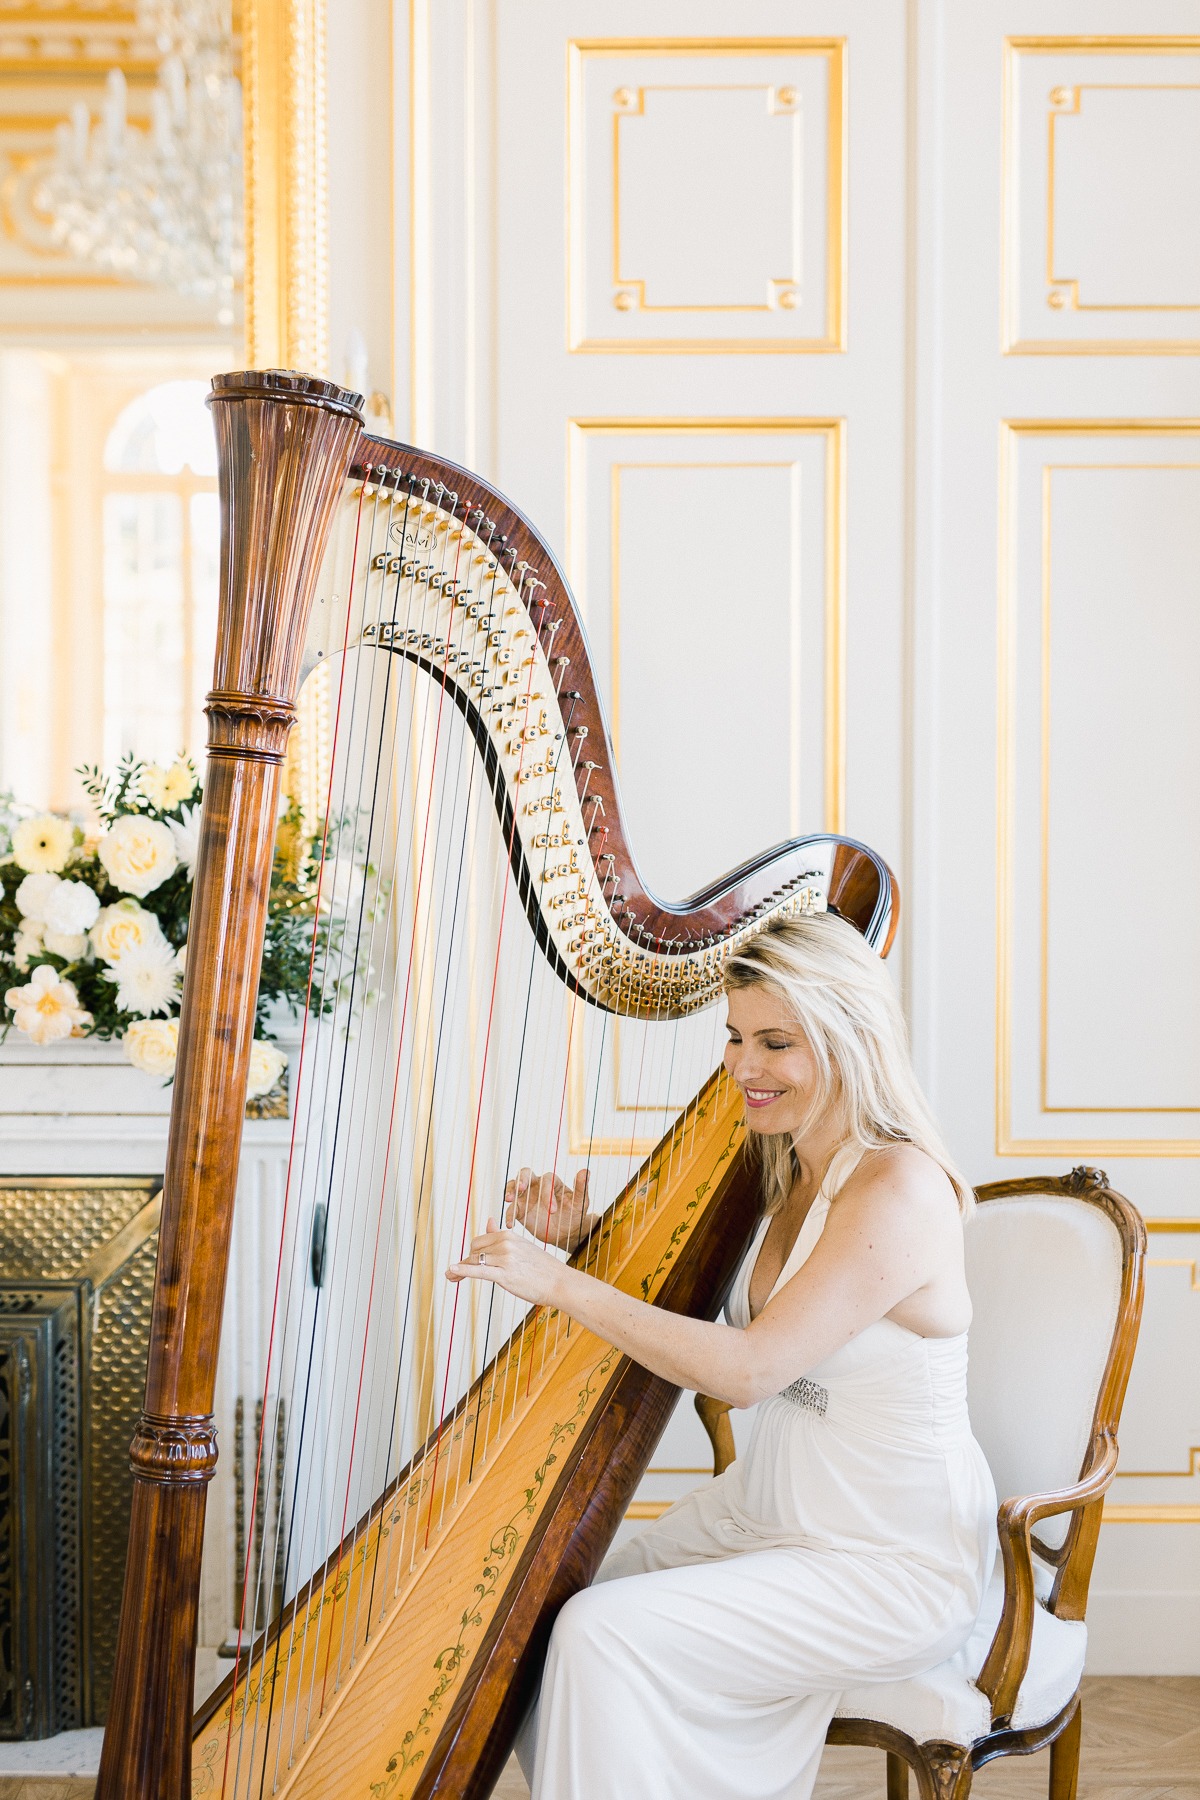 Gilded Wedding Inspiration On The French Riviera